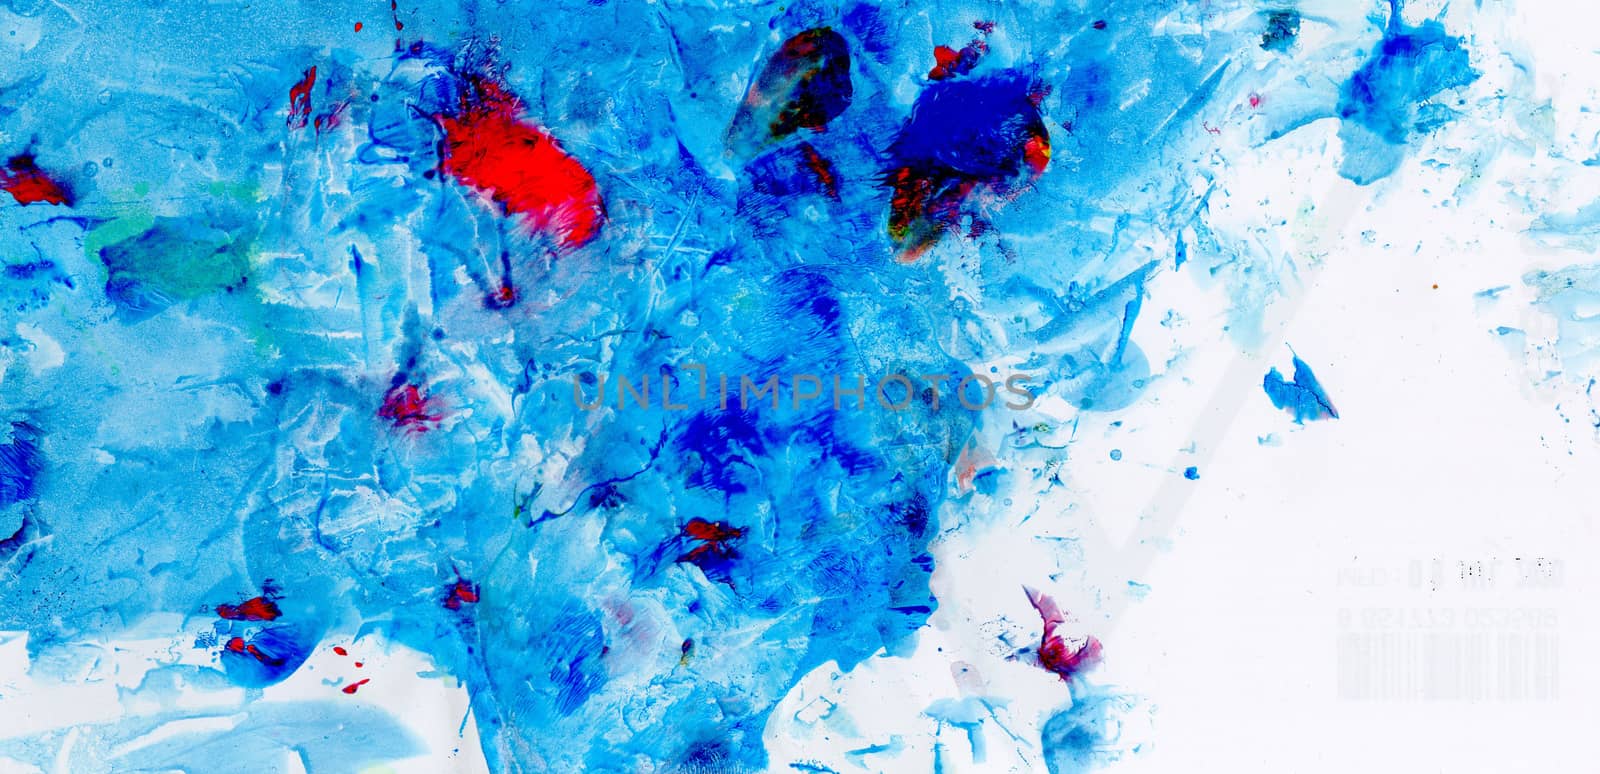 Abstract background of watercolor on paper texture, hand painted in blue